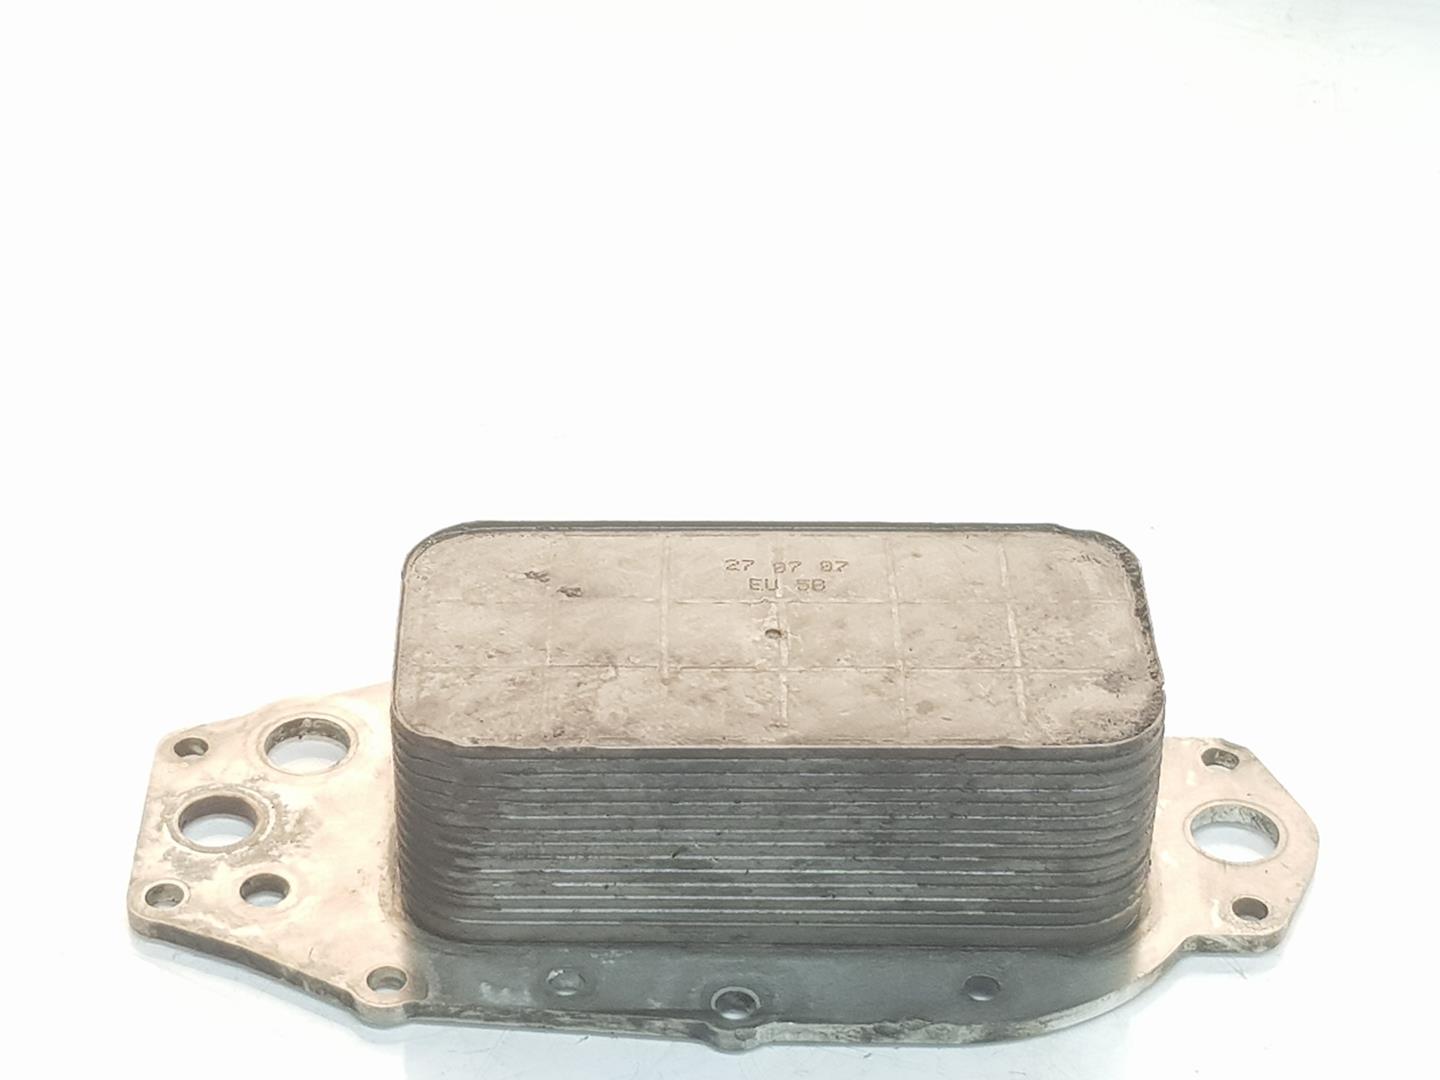 LAND ROVER Discovery 3 generation (2004-2009) Oil Cooler LR009570, LR009570, 1111AA 24238315